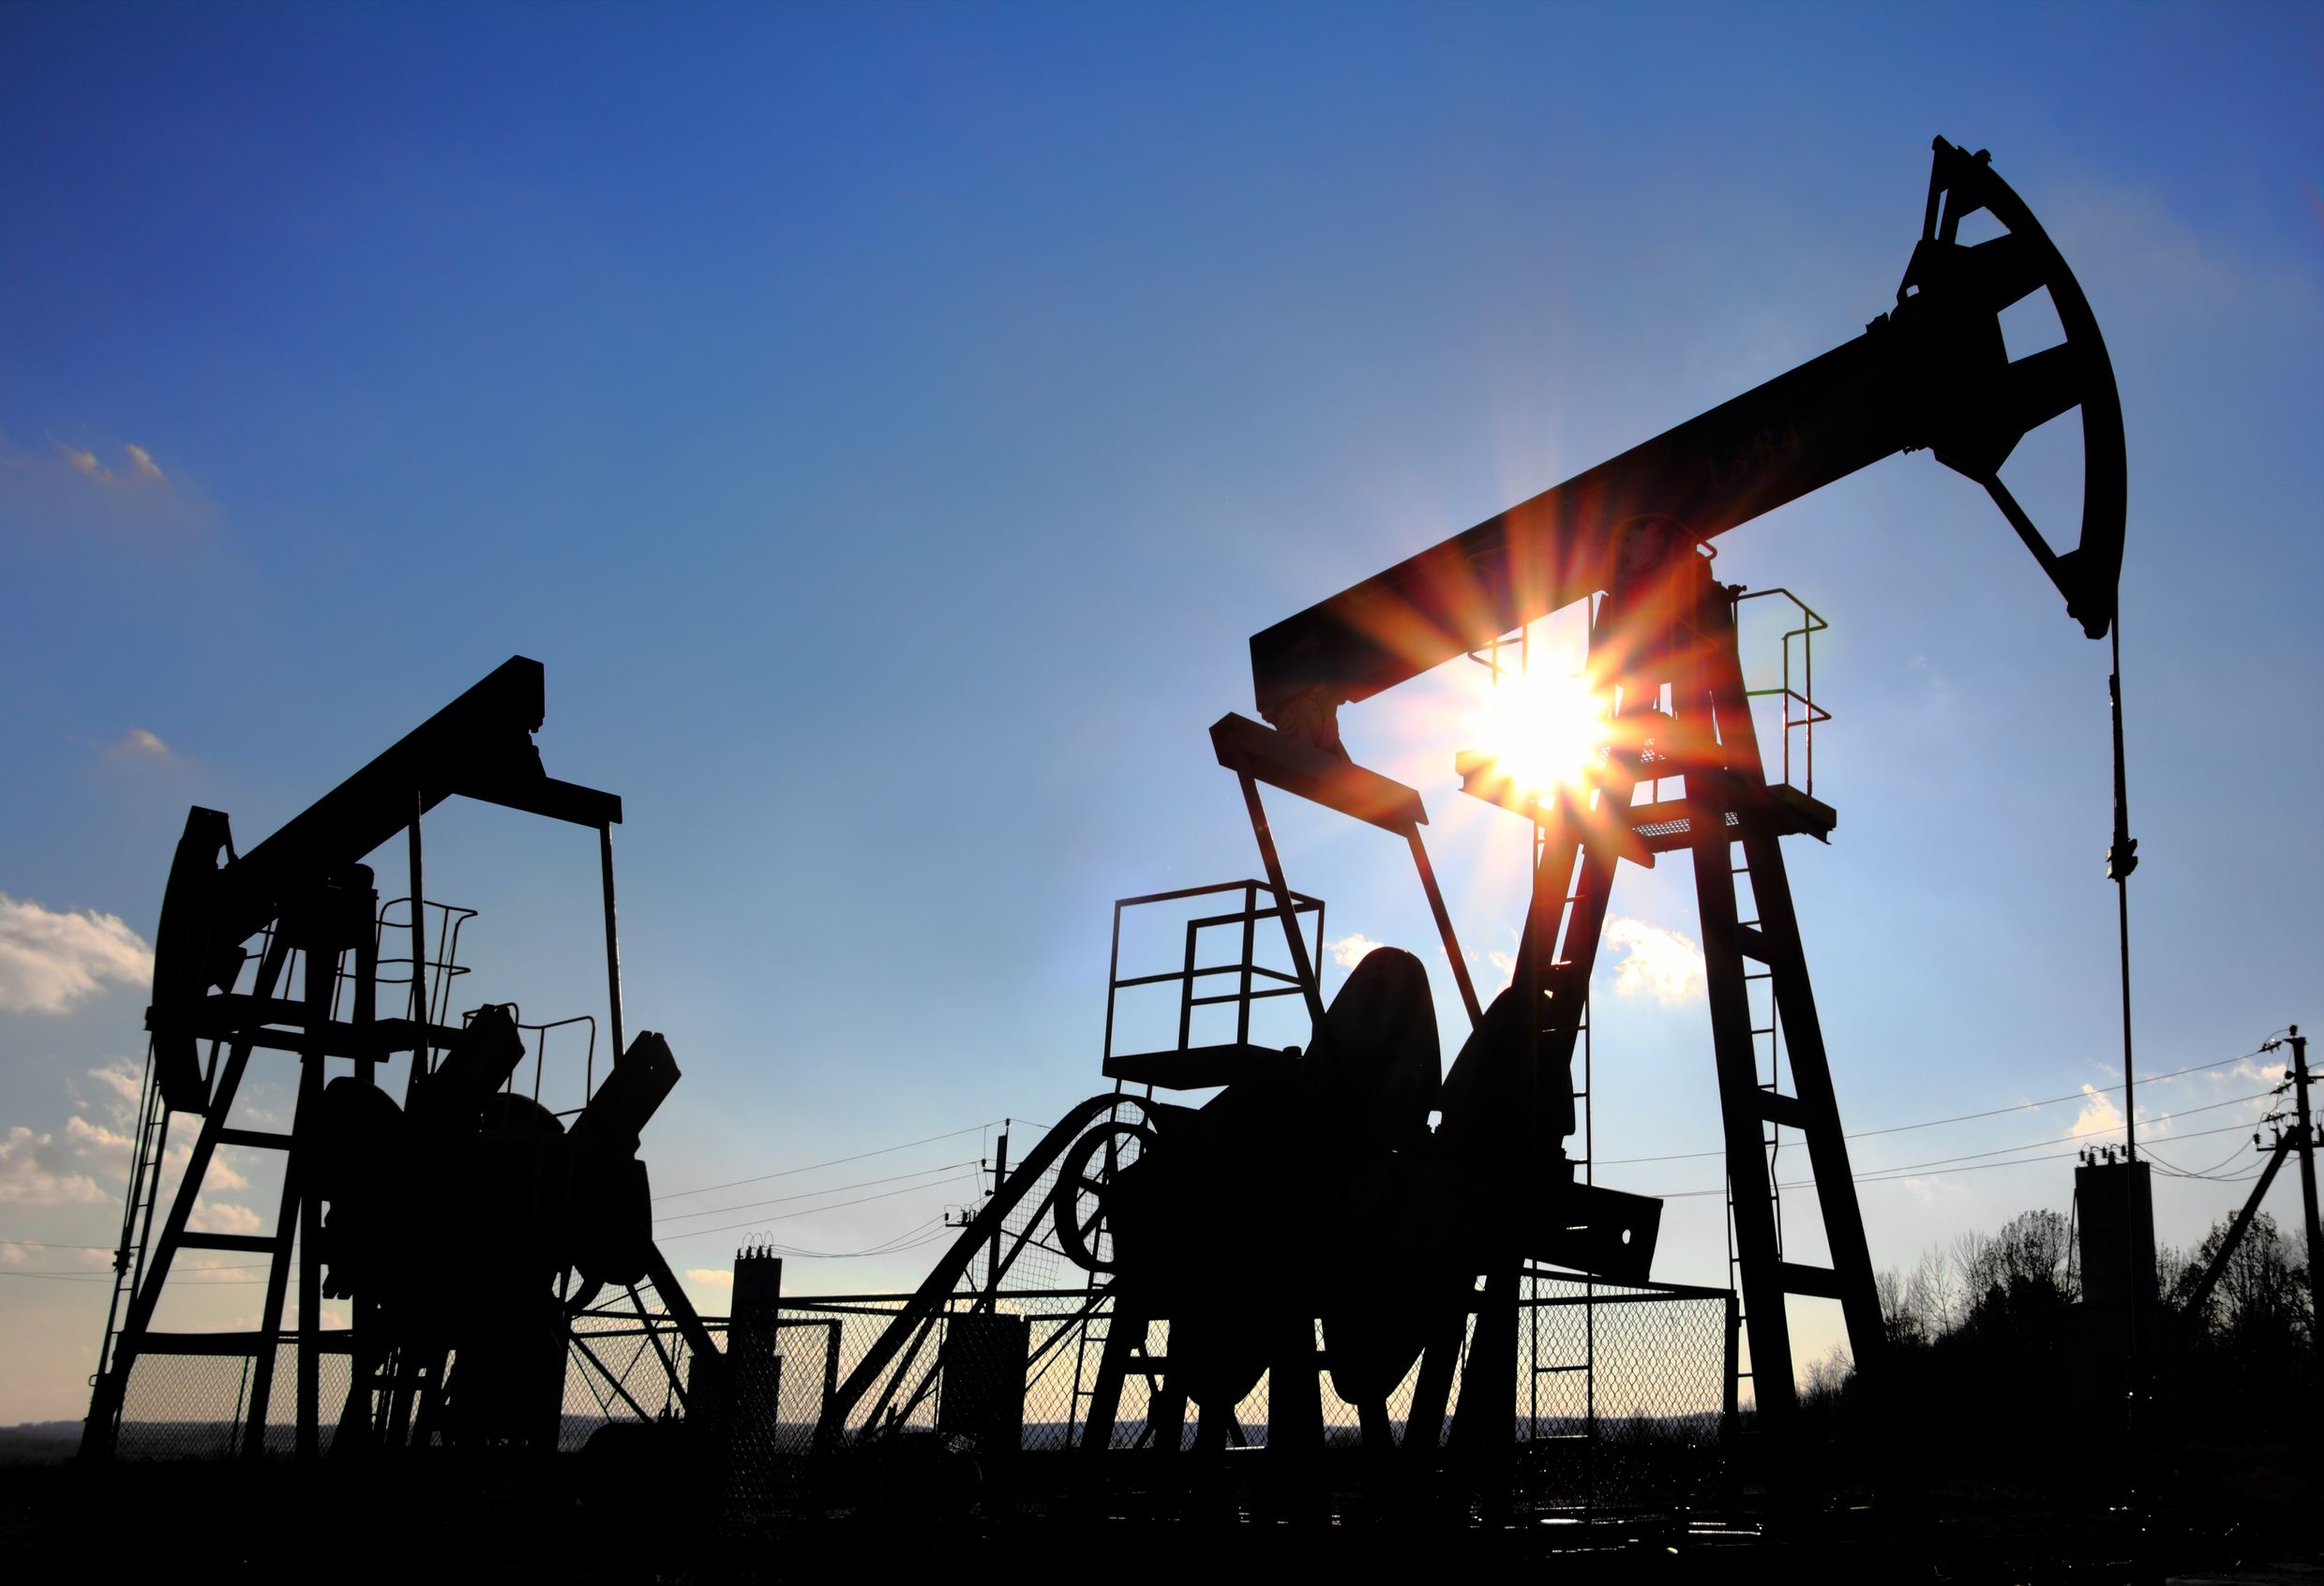 When It Comes to Finding Oilfield Drilling Equipment for Sale, There are Ways You Can Save Some Money